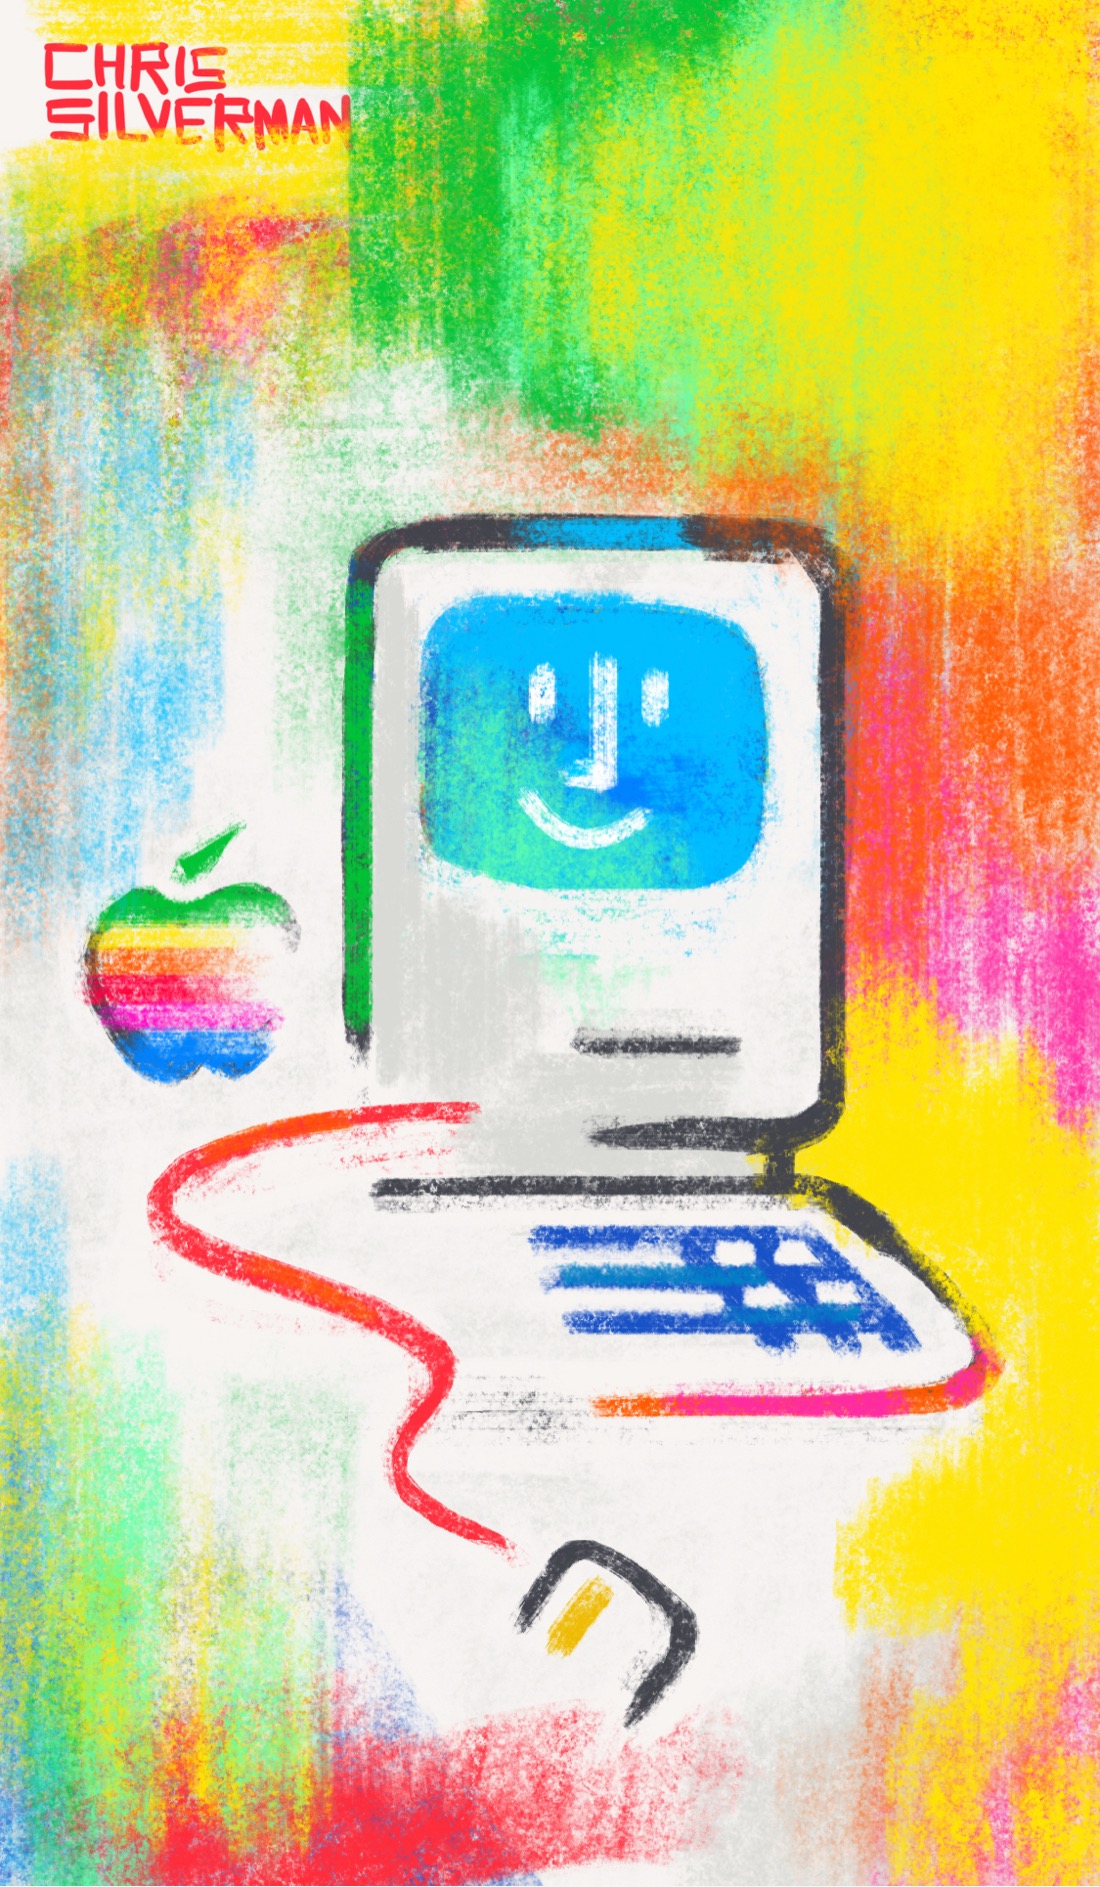 A colorful, abstract background of reds, yellows, greens, and blues. In the center is a minimalist sketch of a Macintosh, rendered in a few quick lines: the "Picasso" logo featured on the branding for the first Macintosh. There is a smiling face on the screen, and a rainbow apple with a bite out of it placed to the left of the Macintosh.